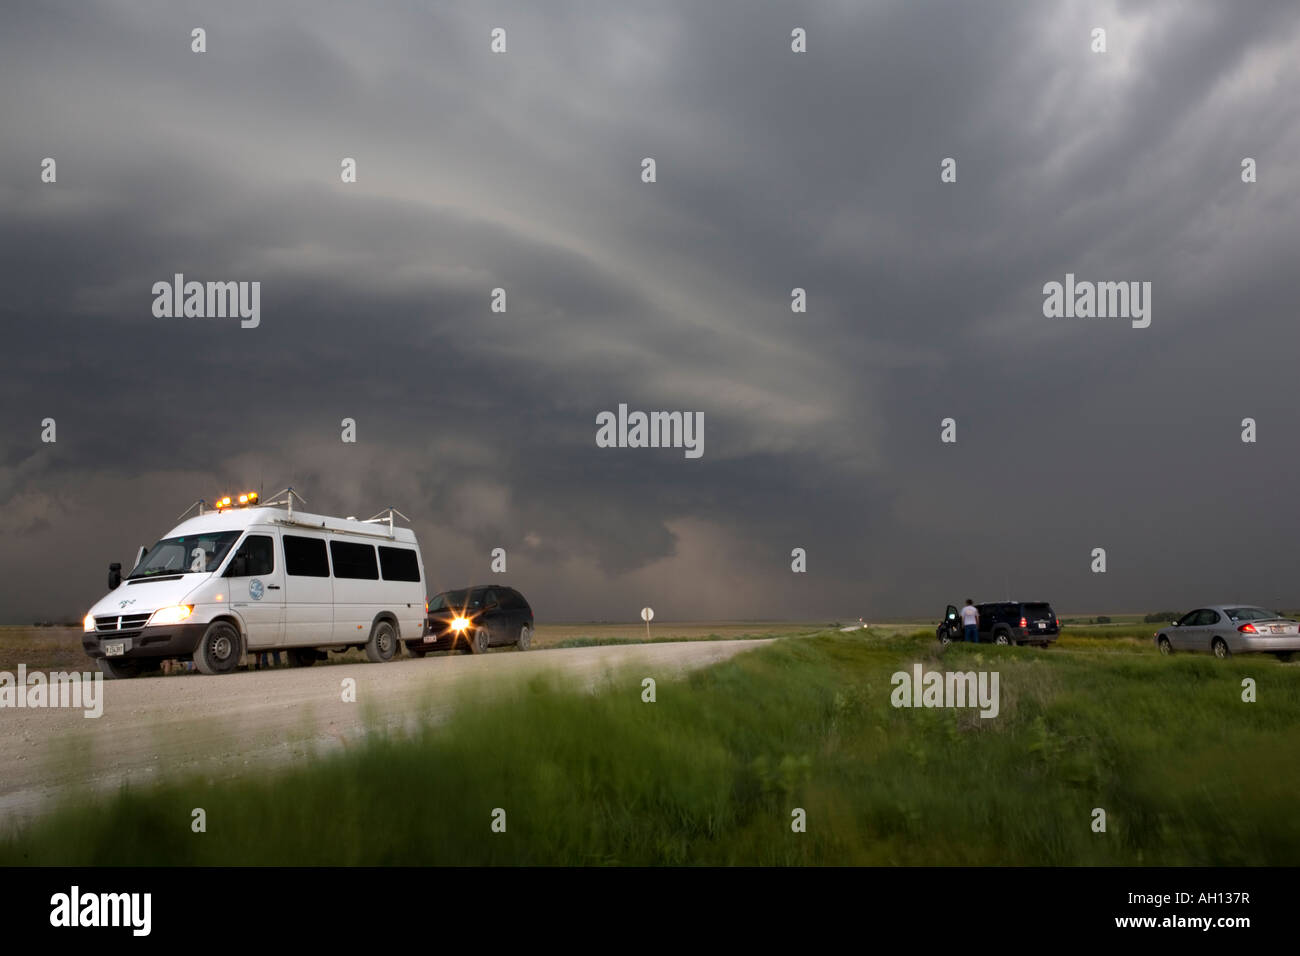 Storm chasers and their vehicles watch a supercell thunderstorm in Kansas USA on a rural dirt road Stock Photo